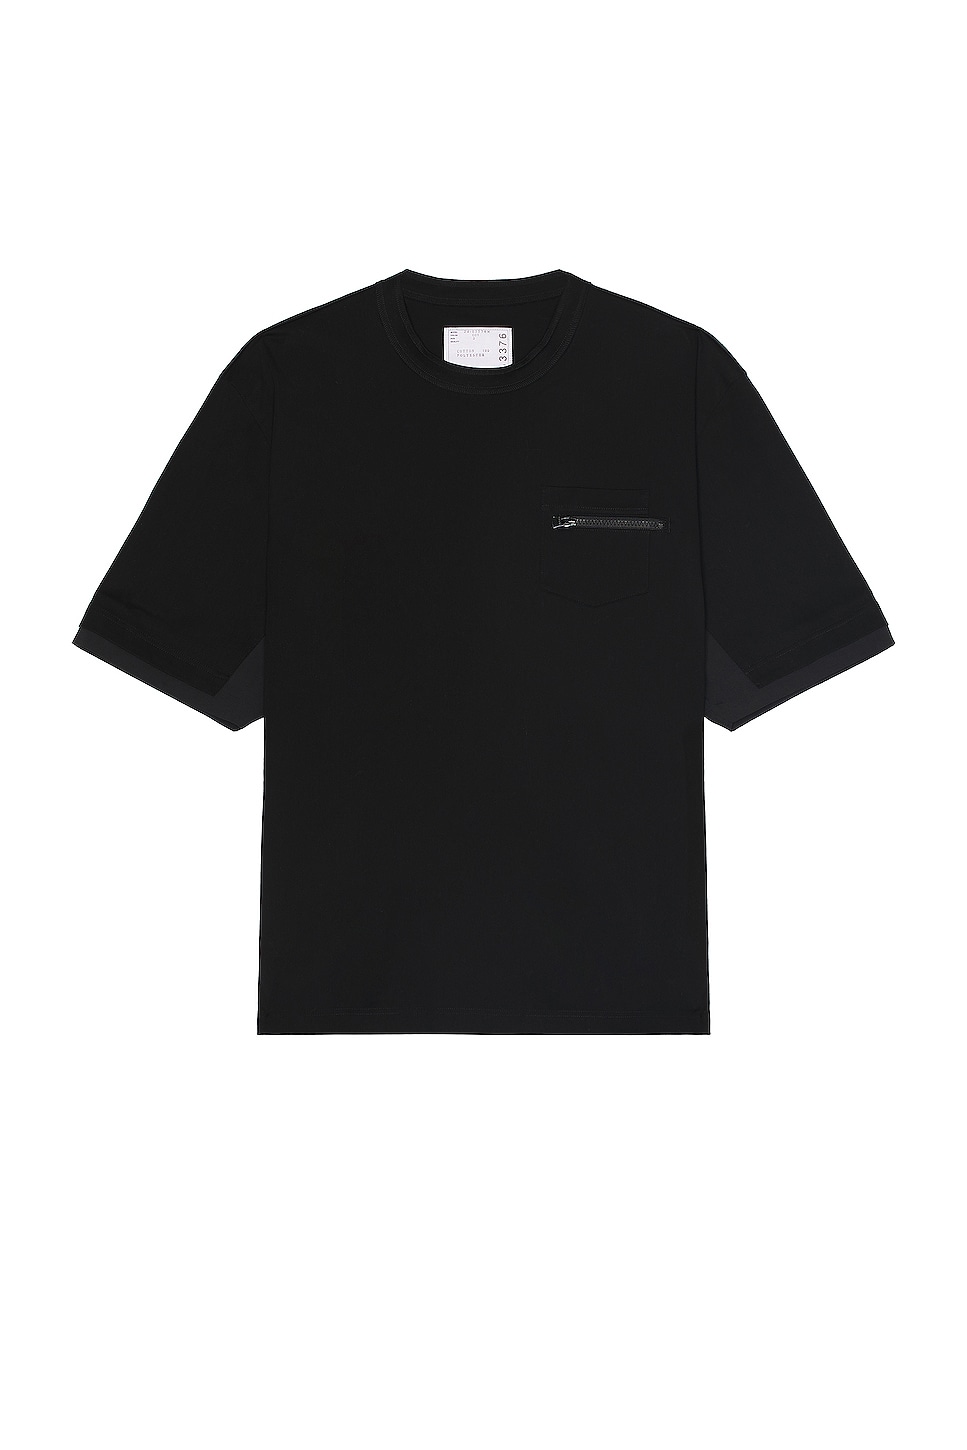 Image 1 of Sacai Cotton Jersey T-Shirt in Black